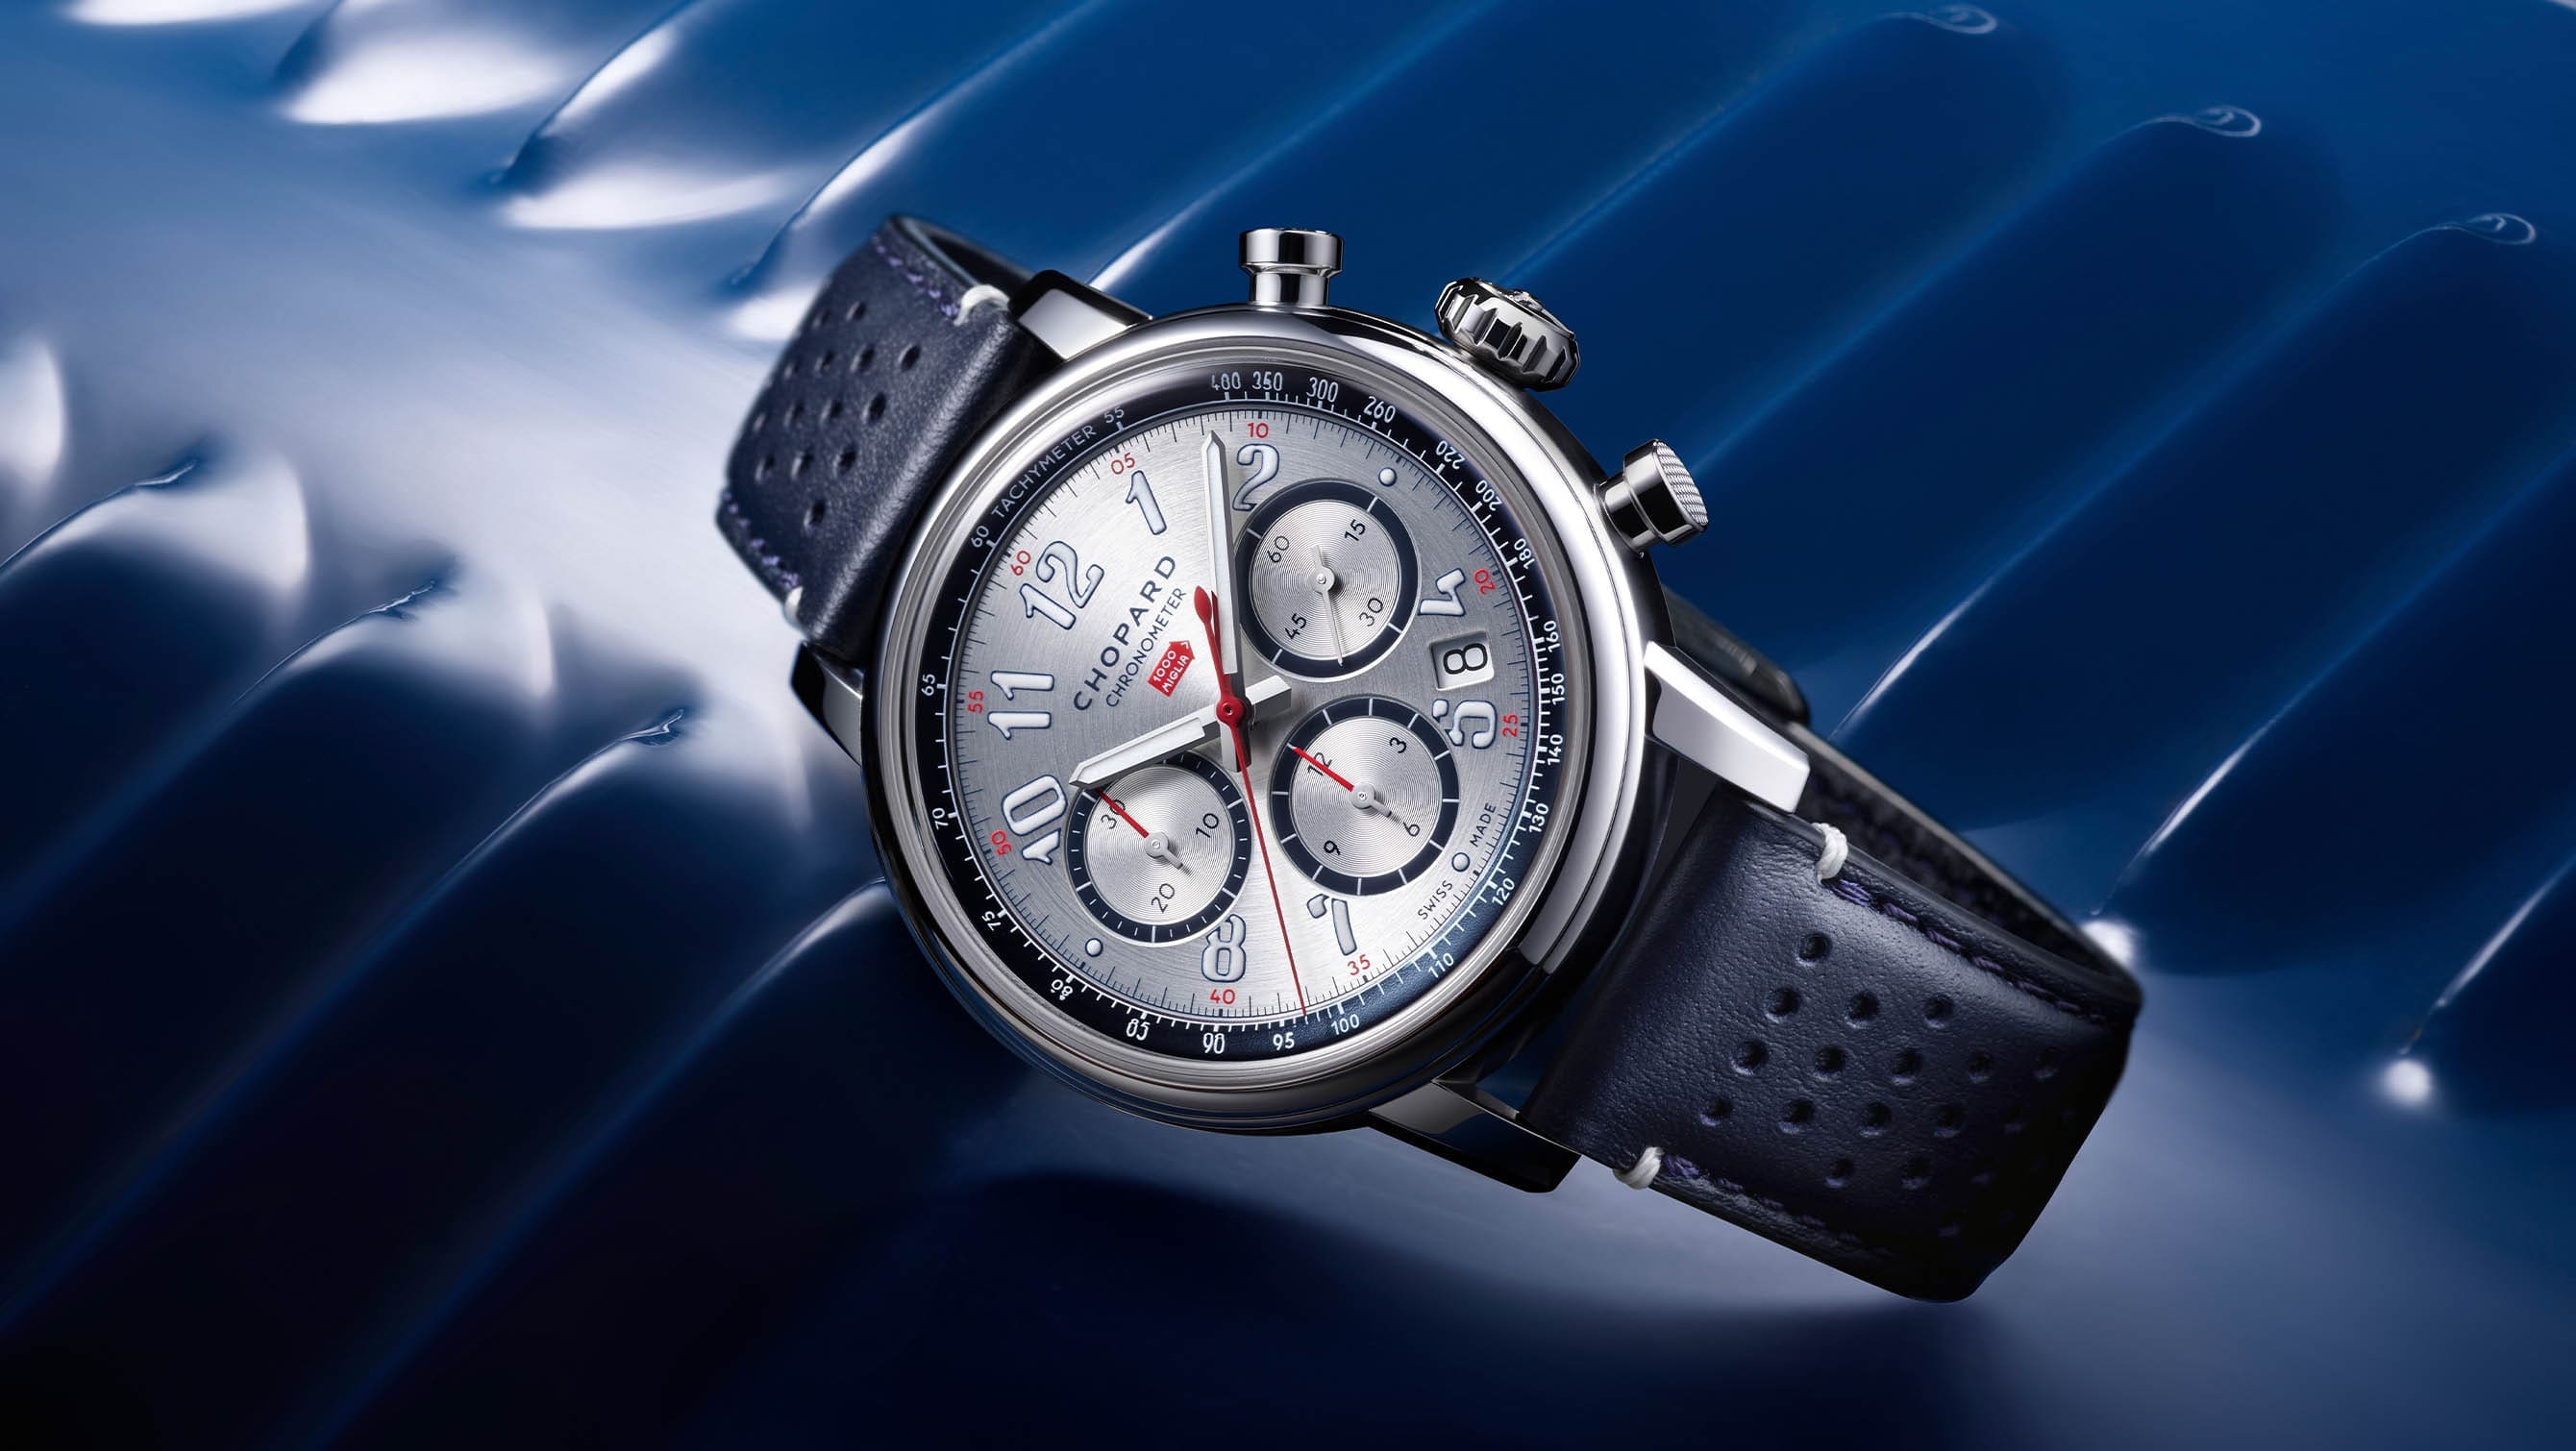 Chopard take a roadtrip to France with the Mille Miglia Classic Chronograph French Edition